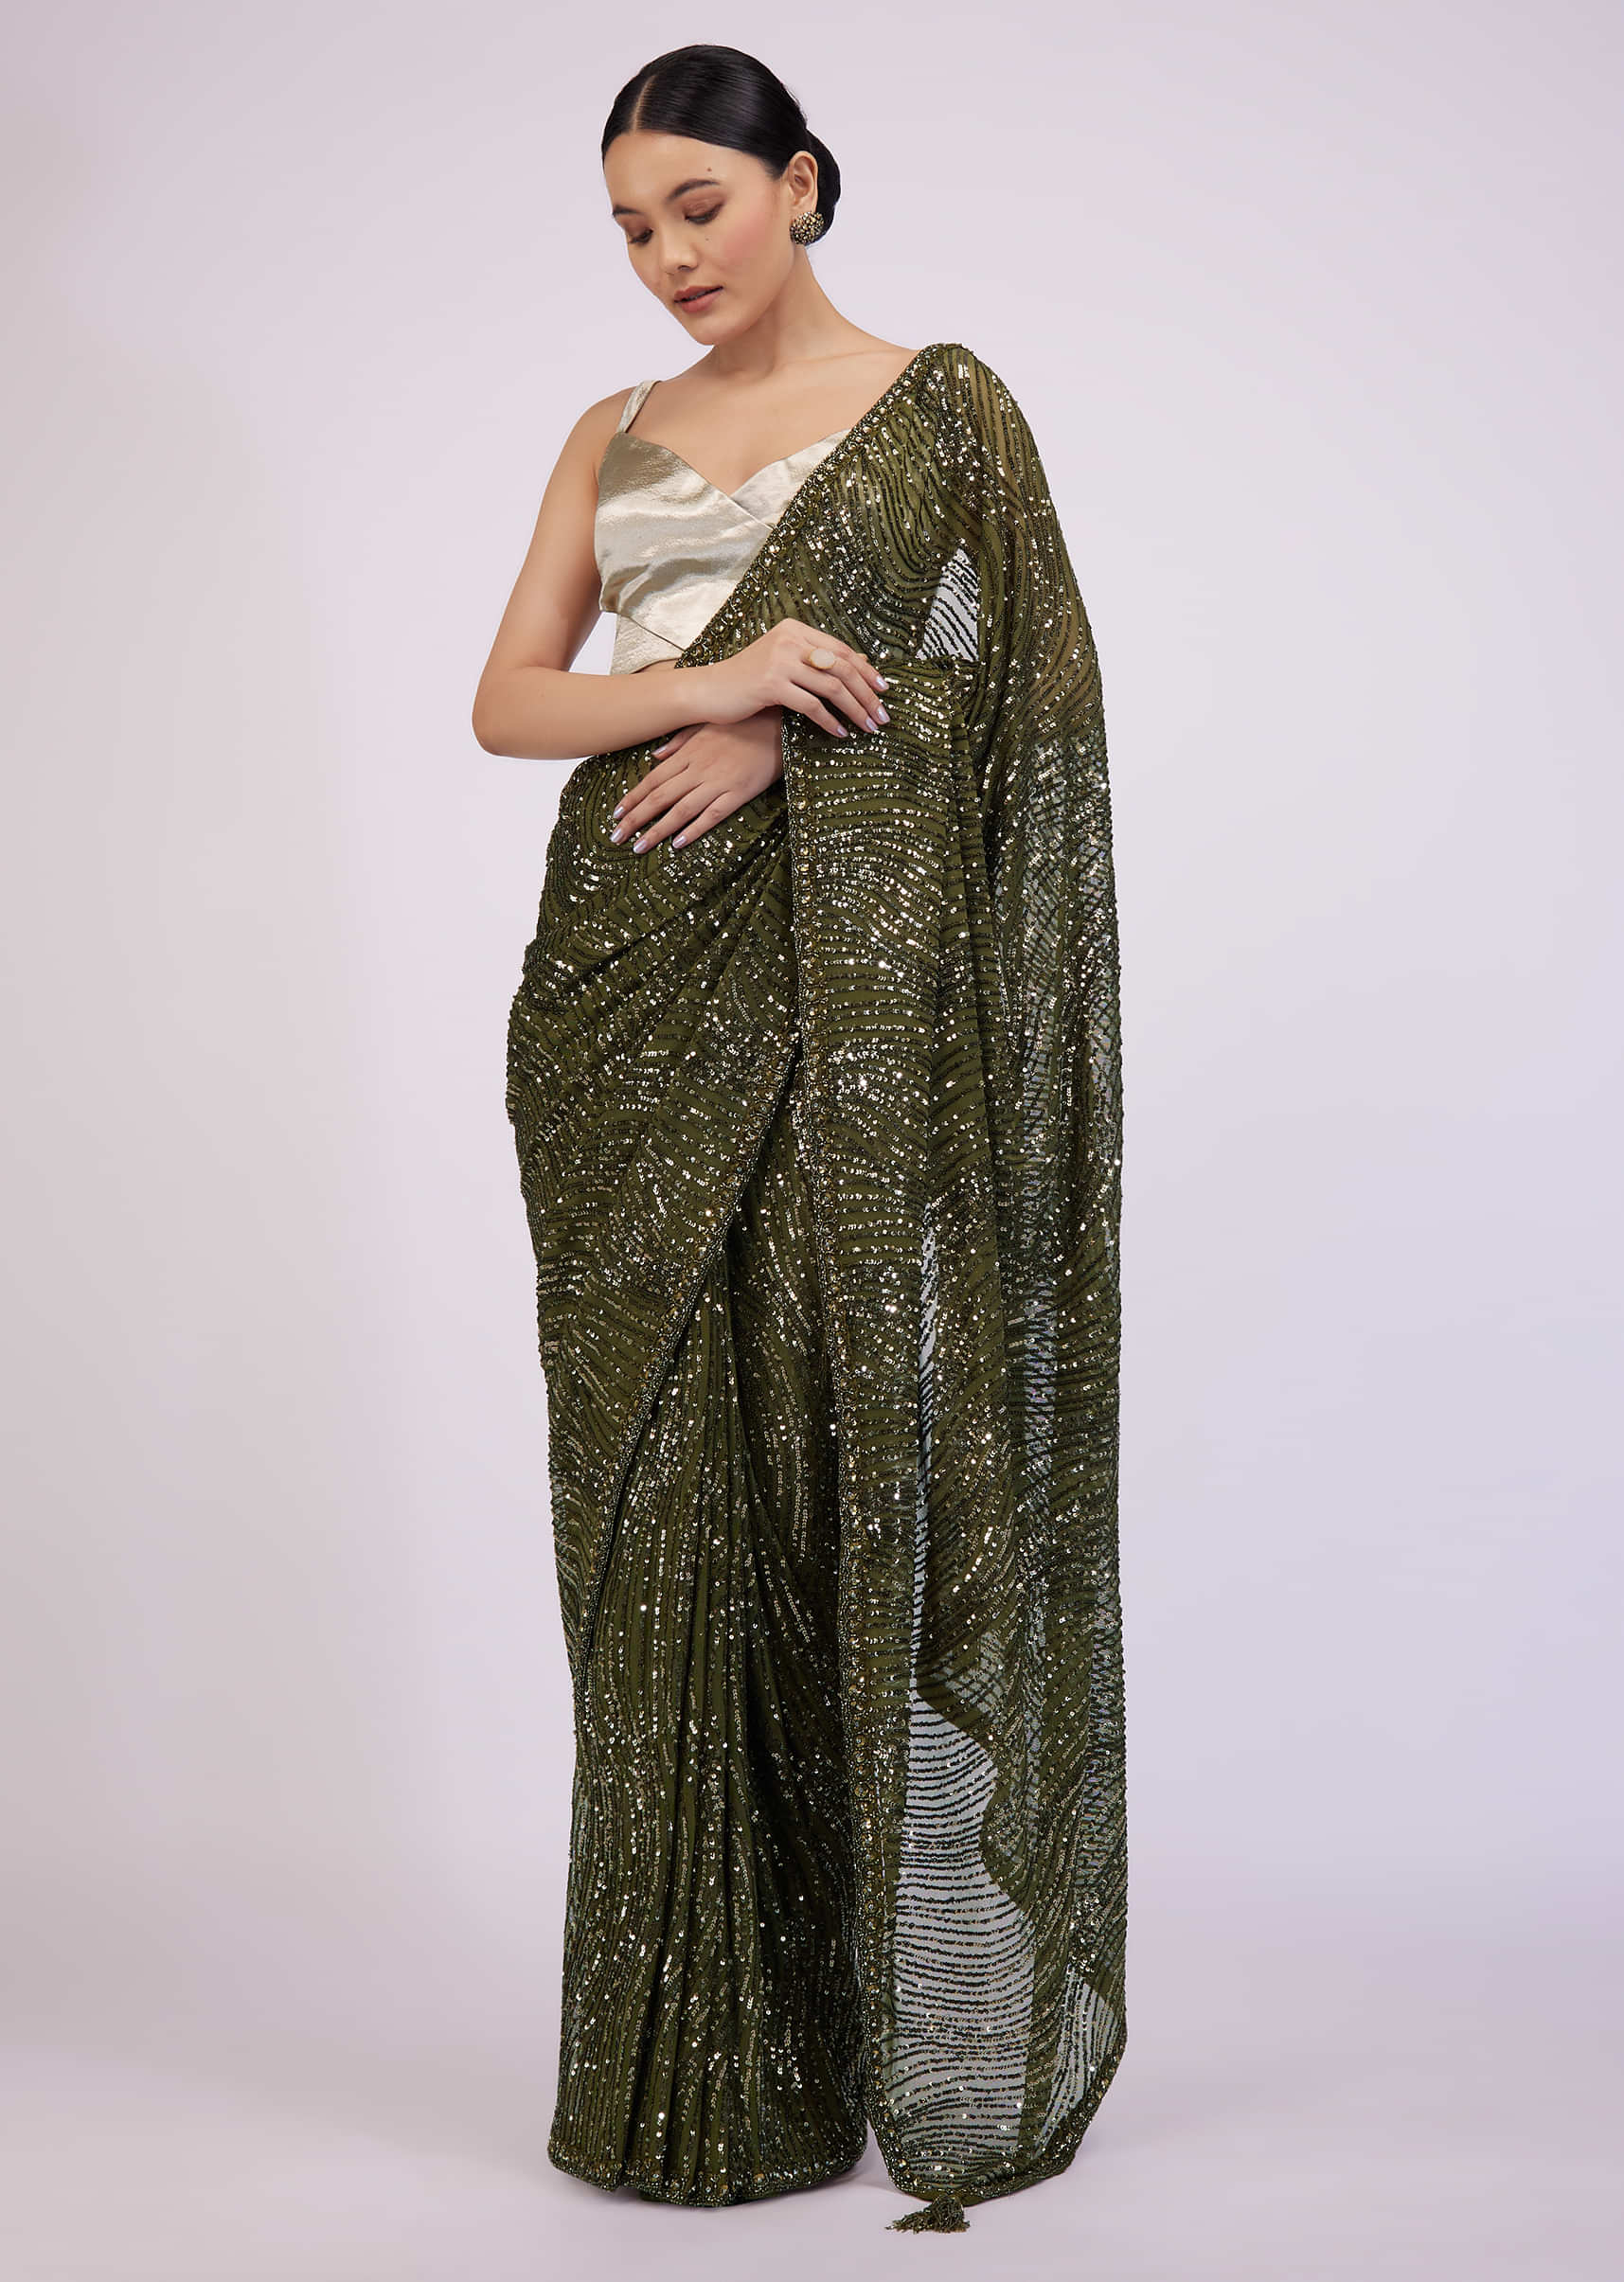 Army Green Saree In Sequins With Embroidery